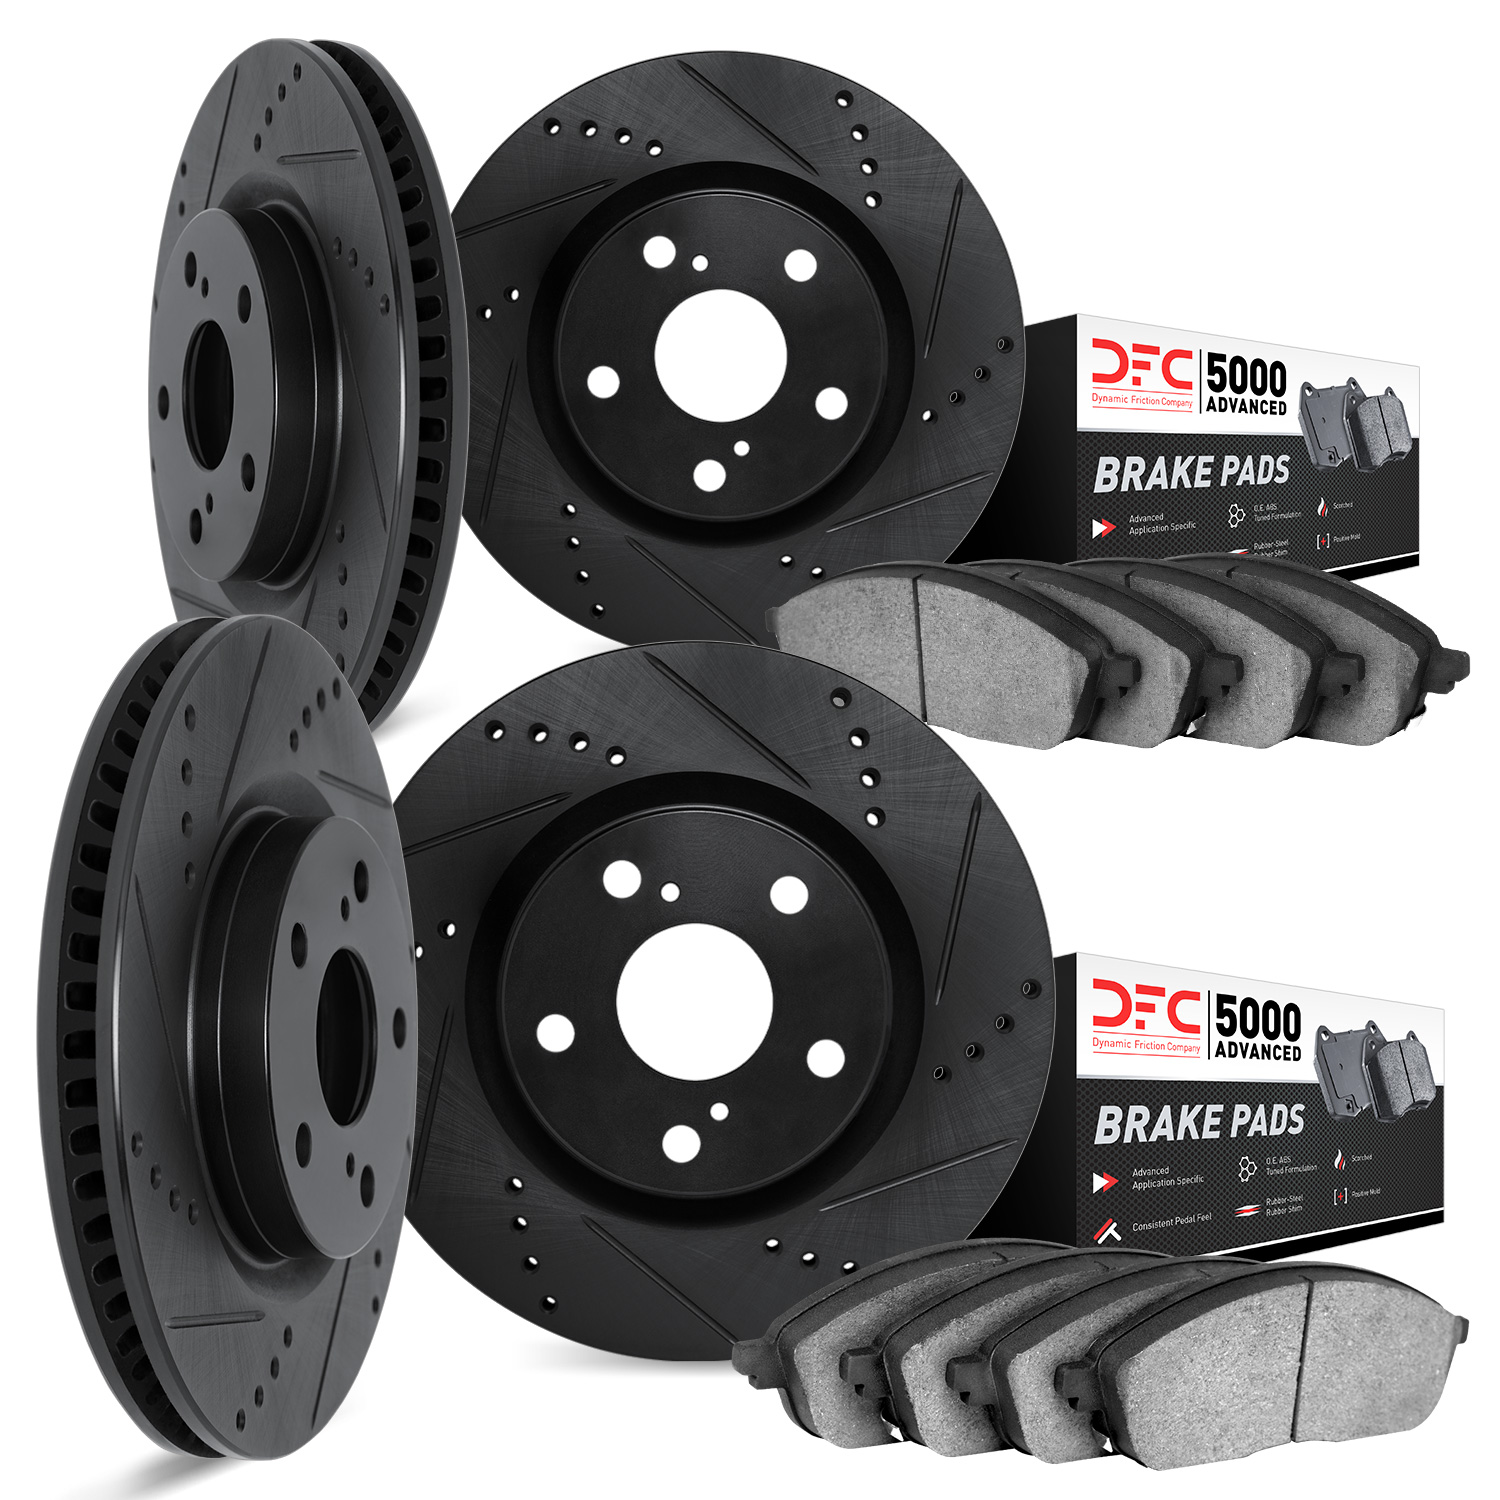 8504-46034 Drilled/Slotted Brake Rotors w/5000 Advanced Brake Pads Kit [Black], 1997-2009 GM, Position: Front and Rear